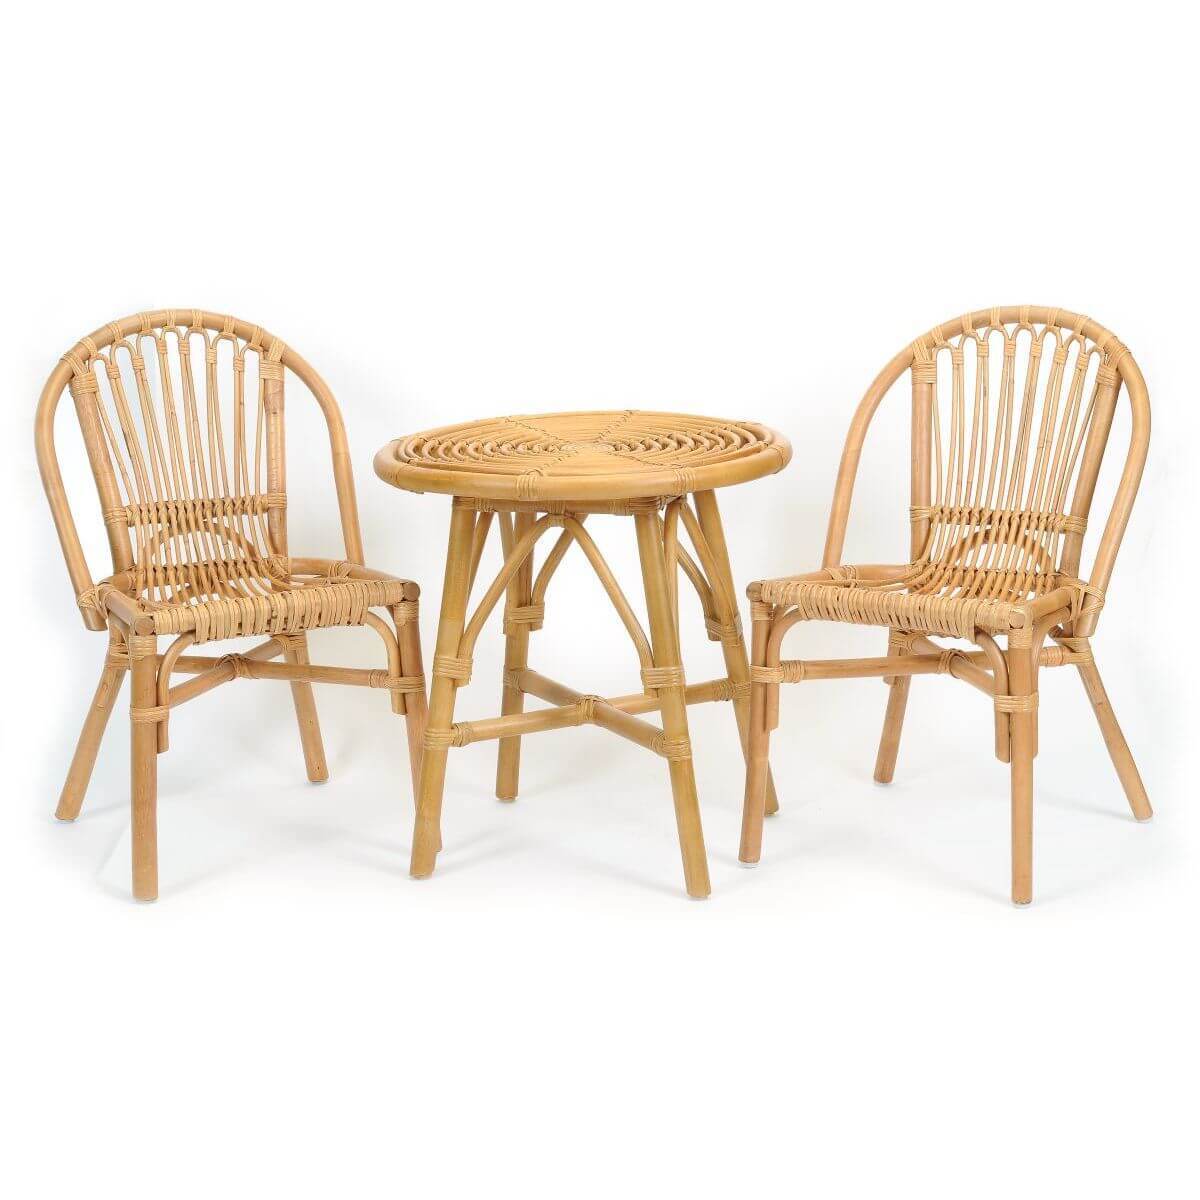 RATTAN KIDS TABLE SET 2 CHAIRS AND 1 TABLE